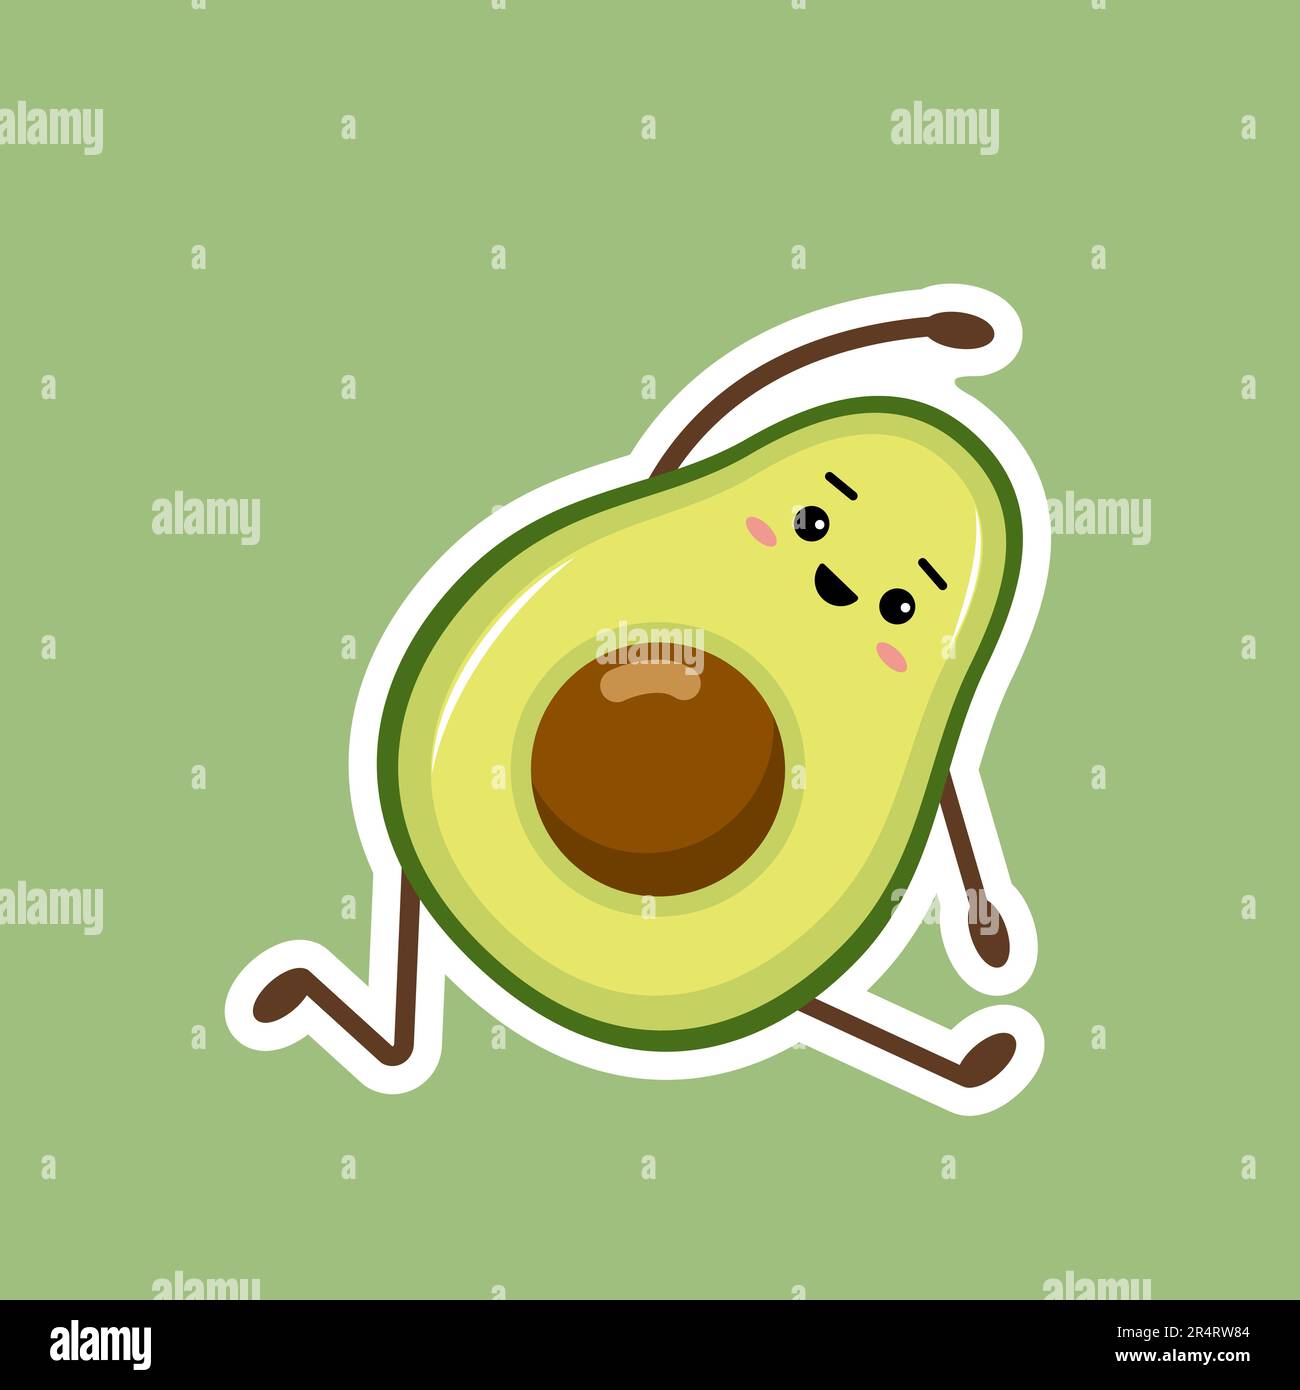 Kawaii cute stickers Vectors & Illustrations for Free Download